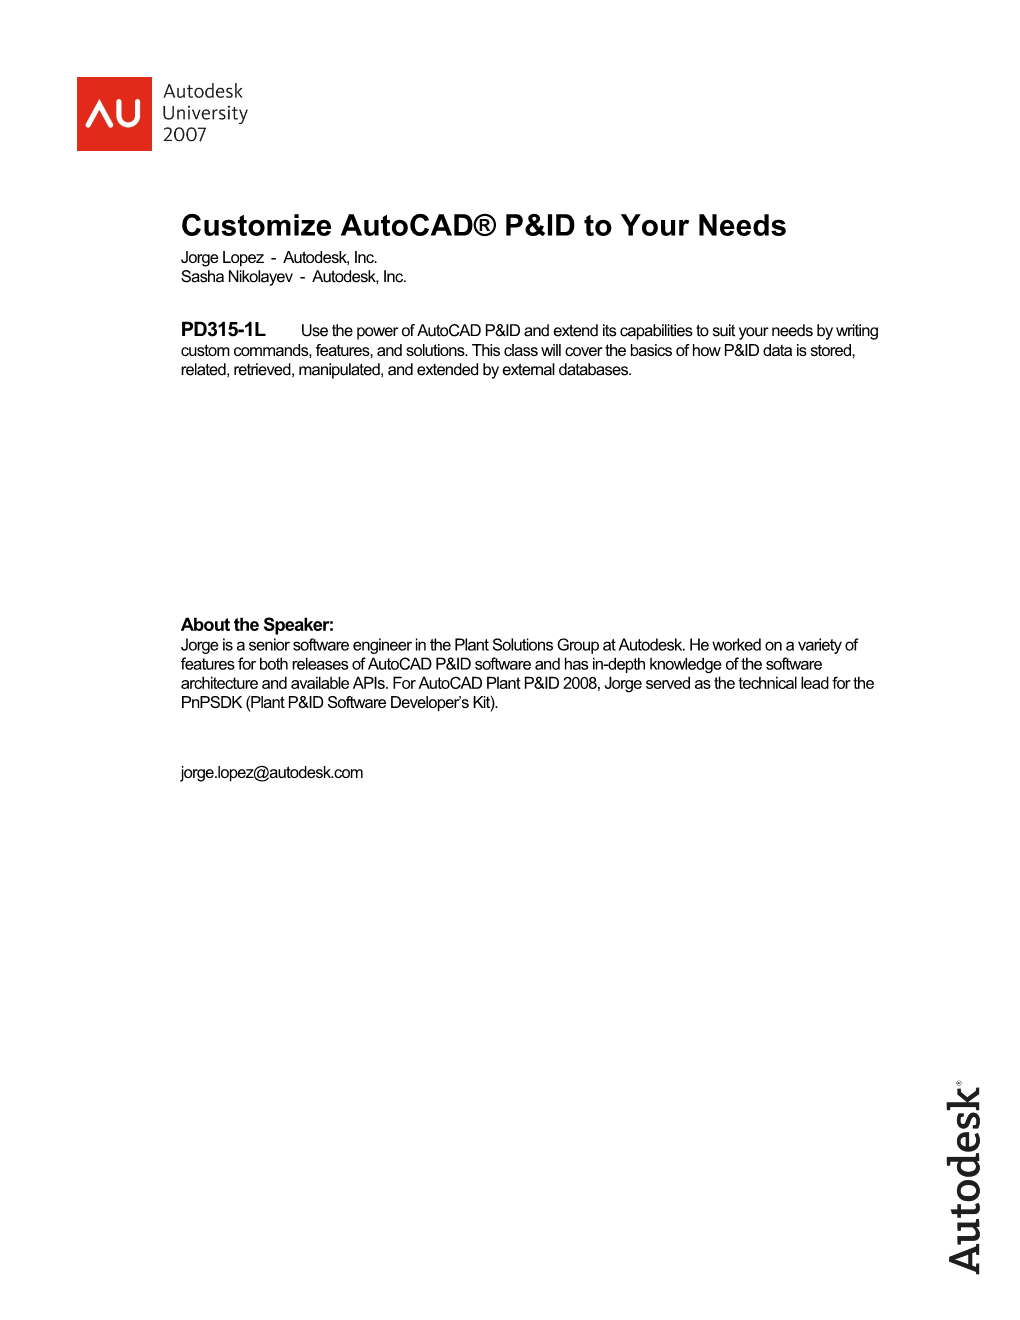 Customize Autocad P&ID to Your Needs